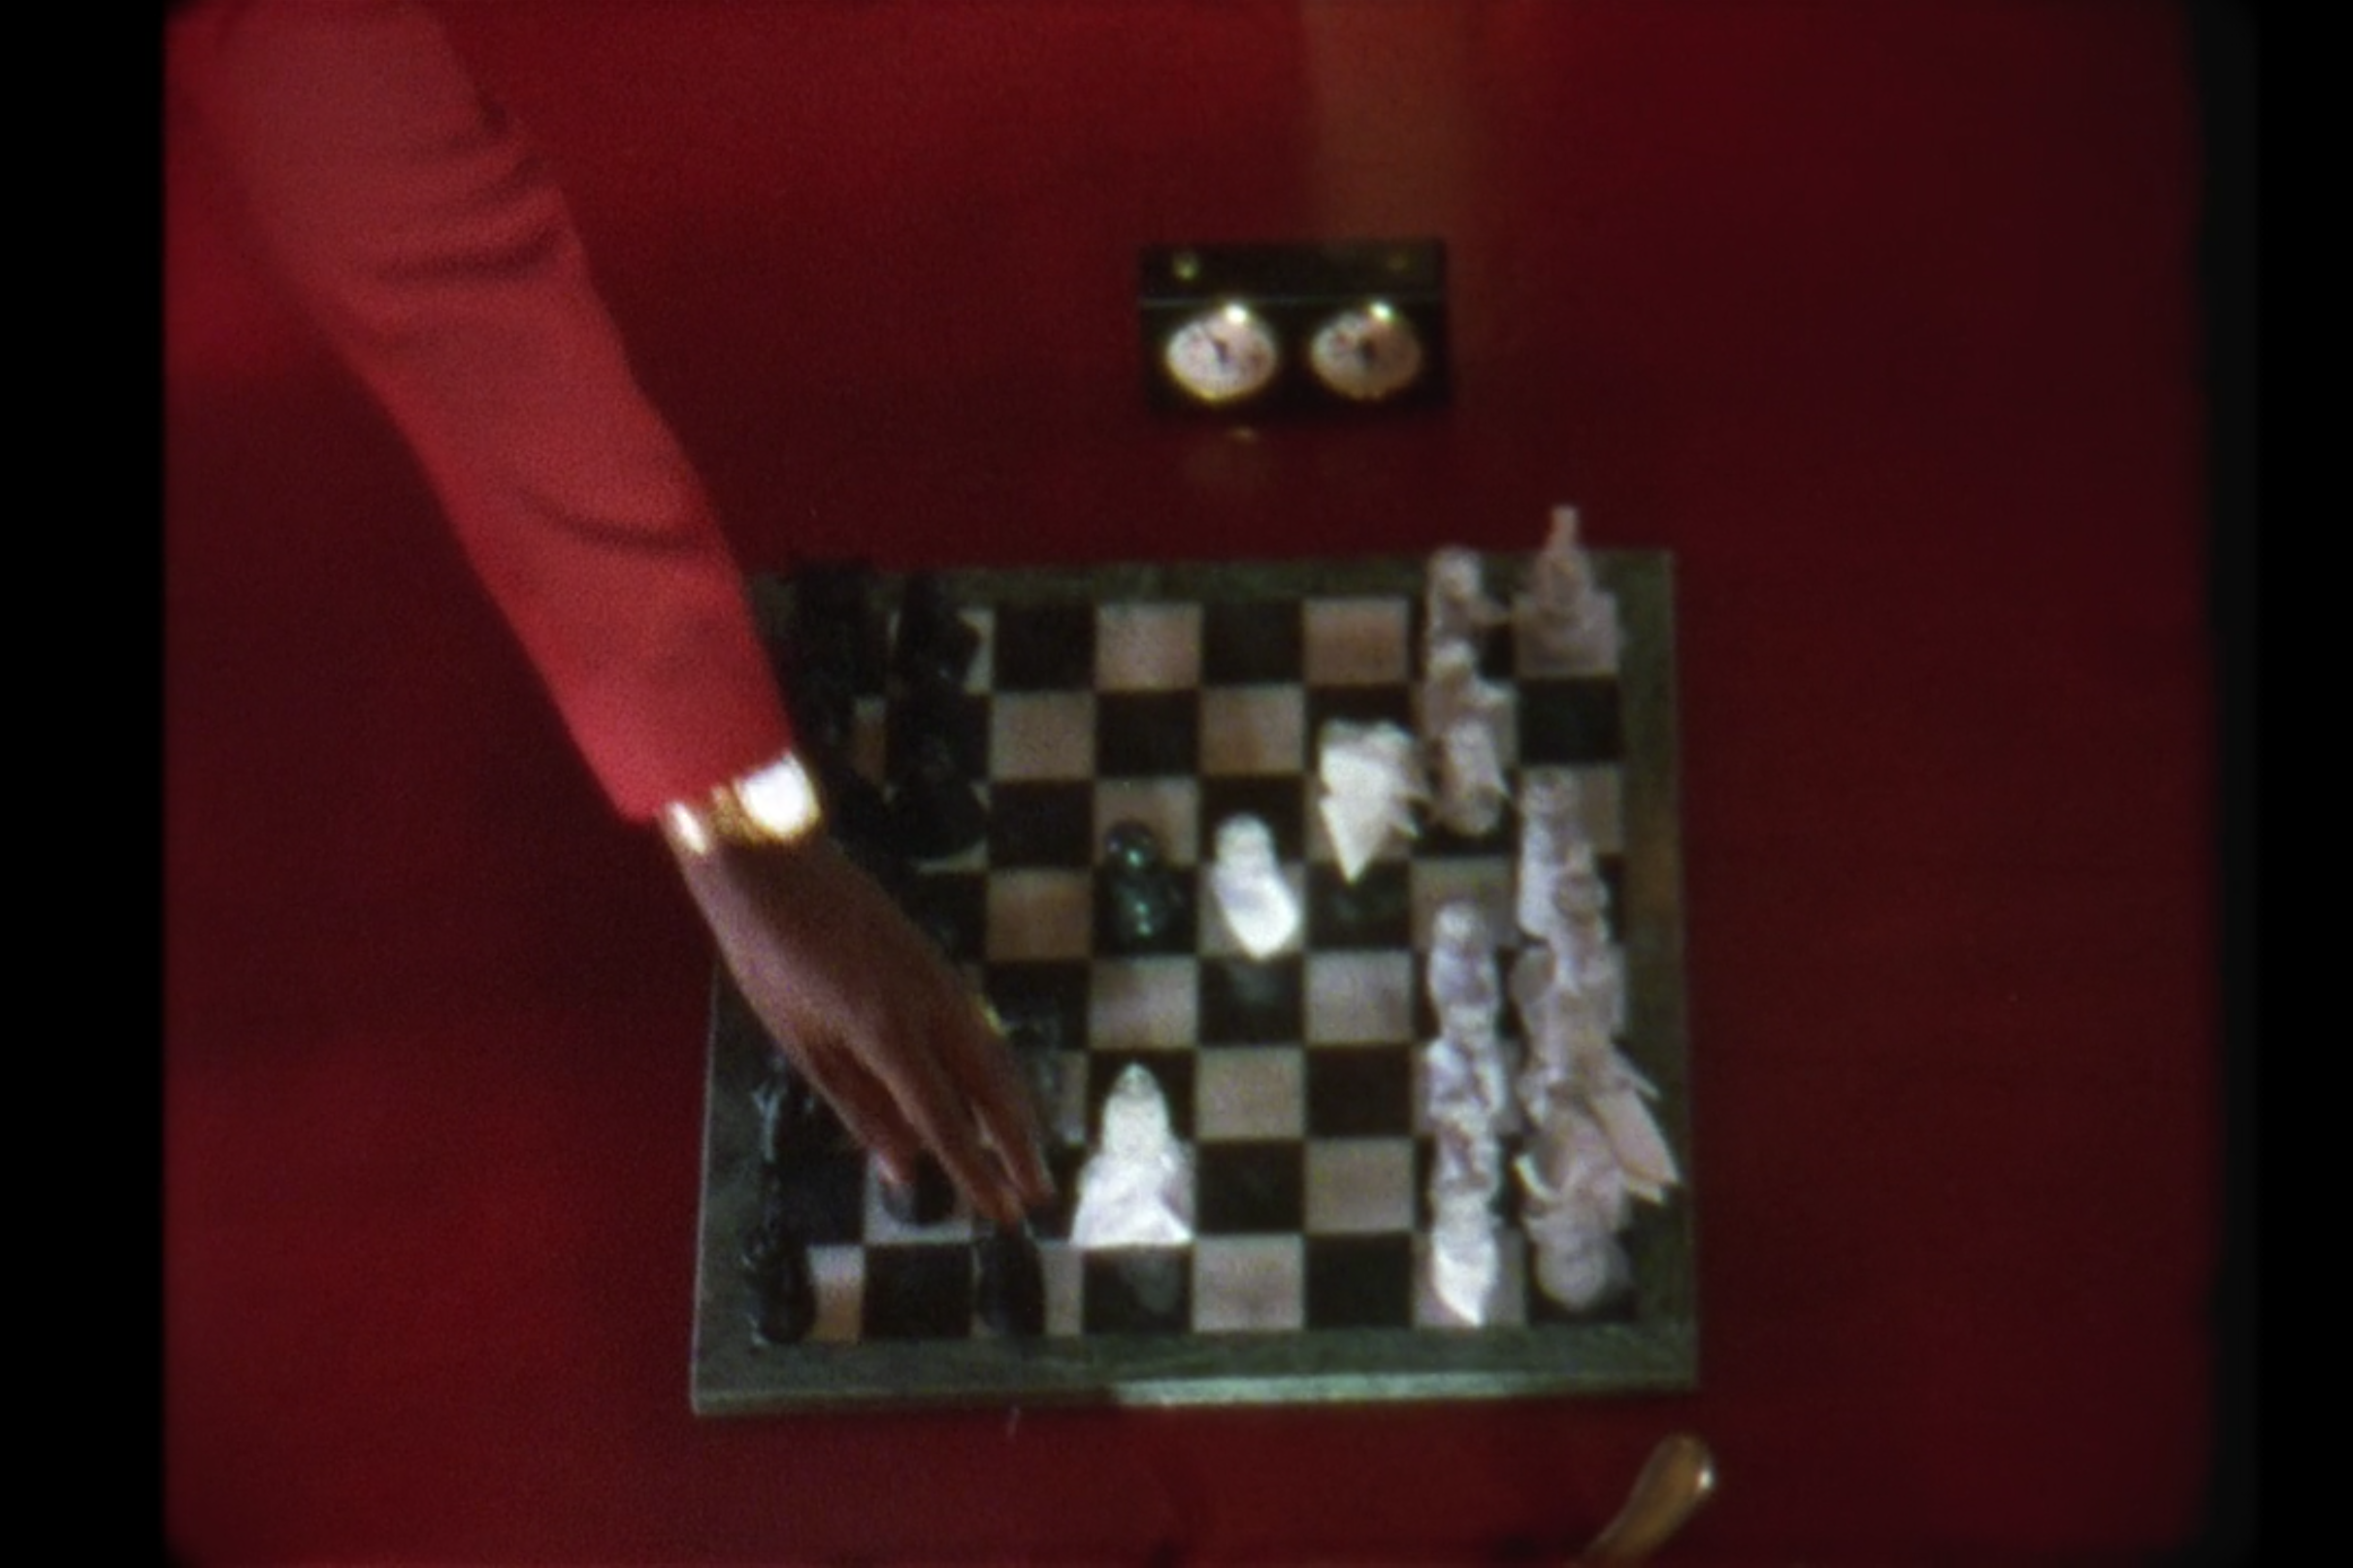 Jay-Z's hand moves a pawn on a chessboard.